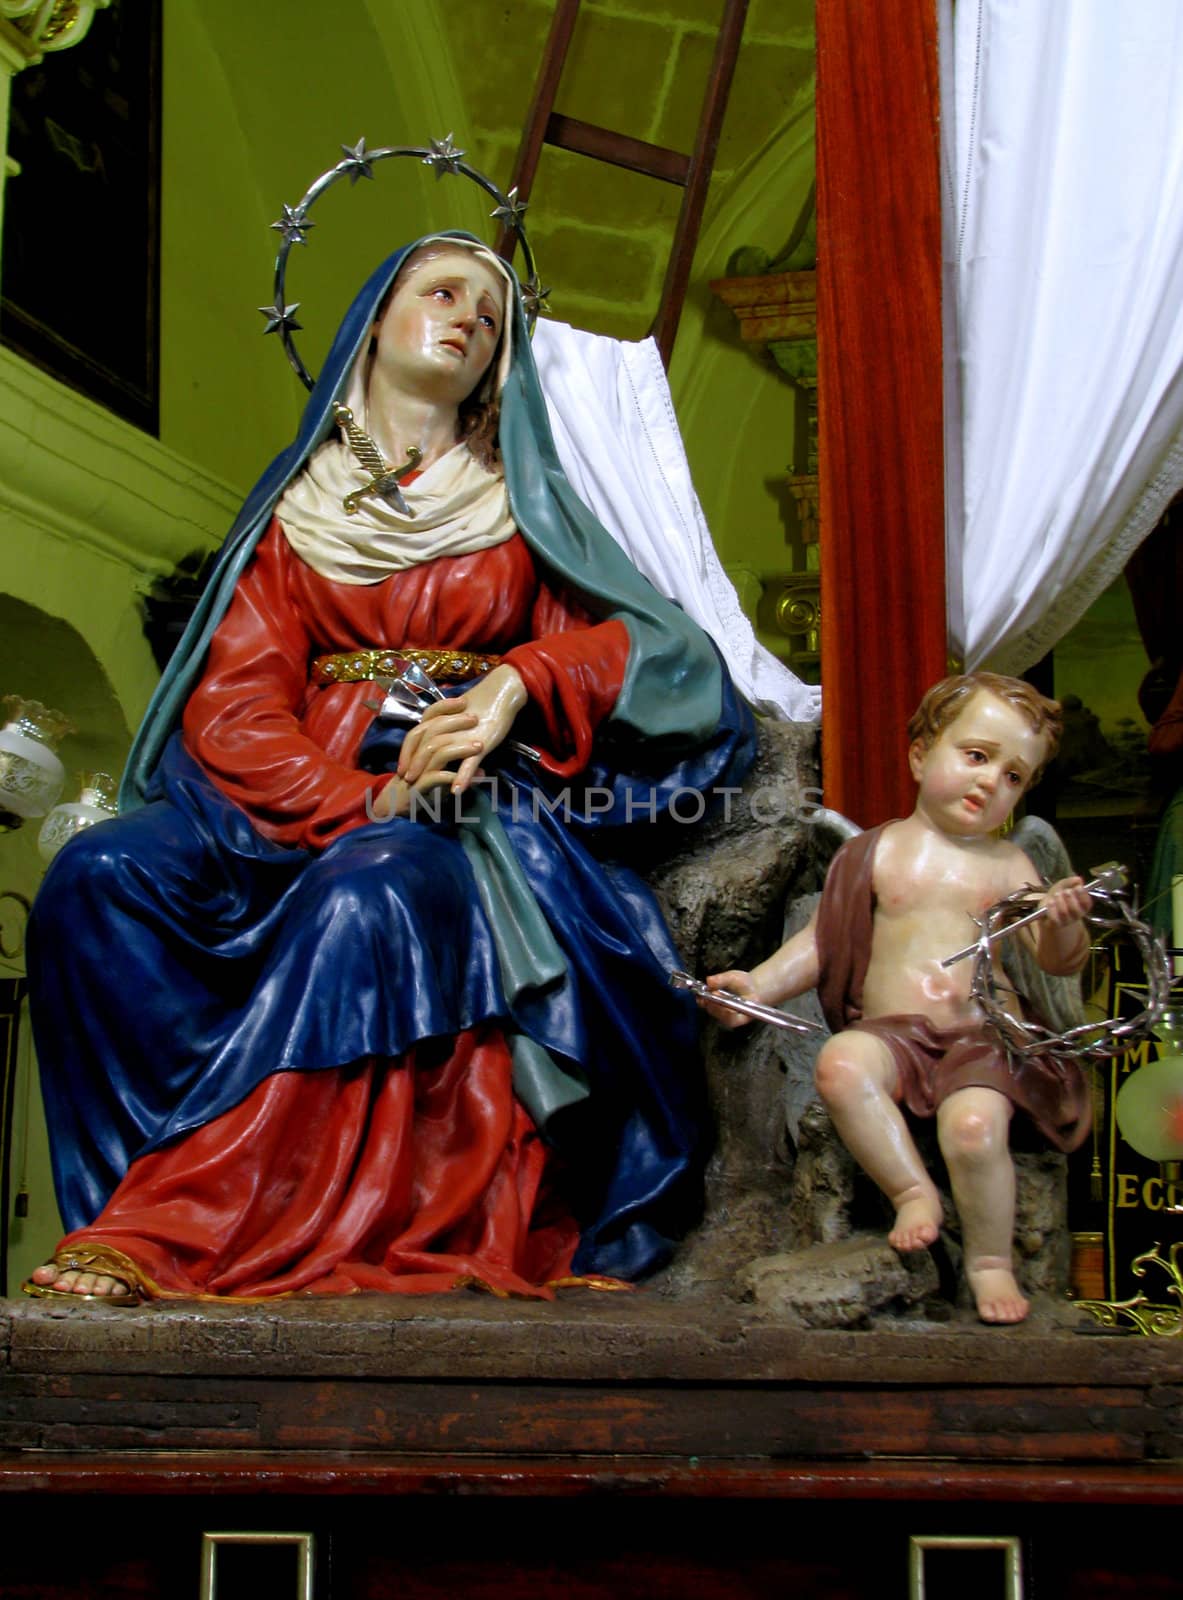 The statue of Our Lady of Sorrows in Valletta, Malta.